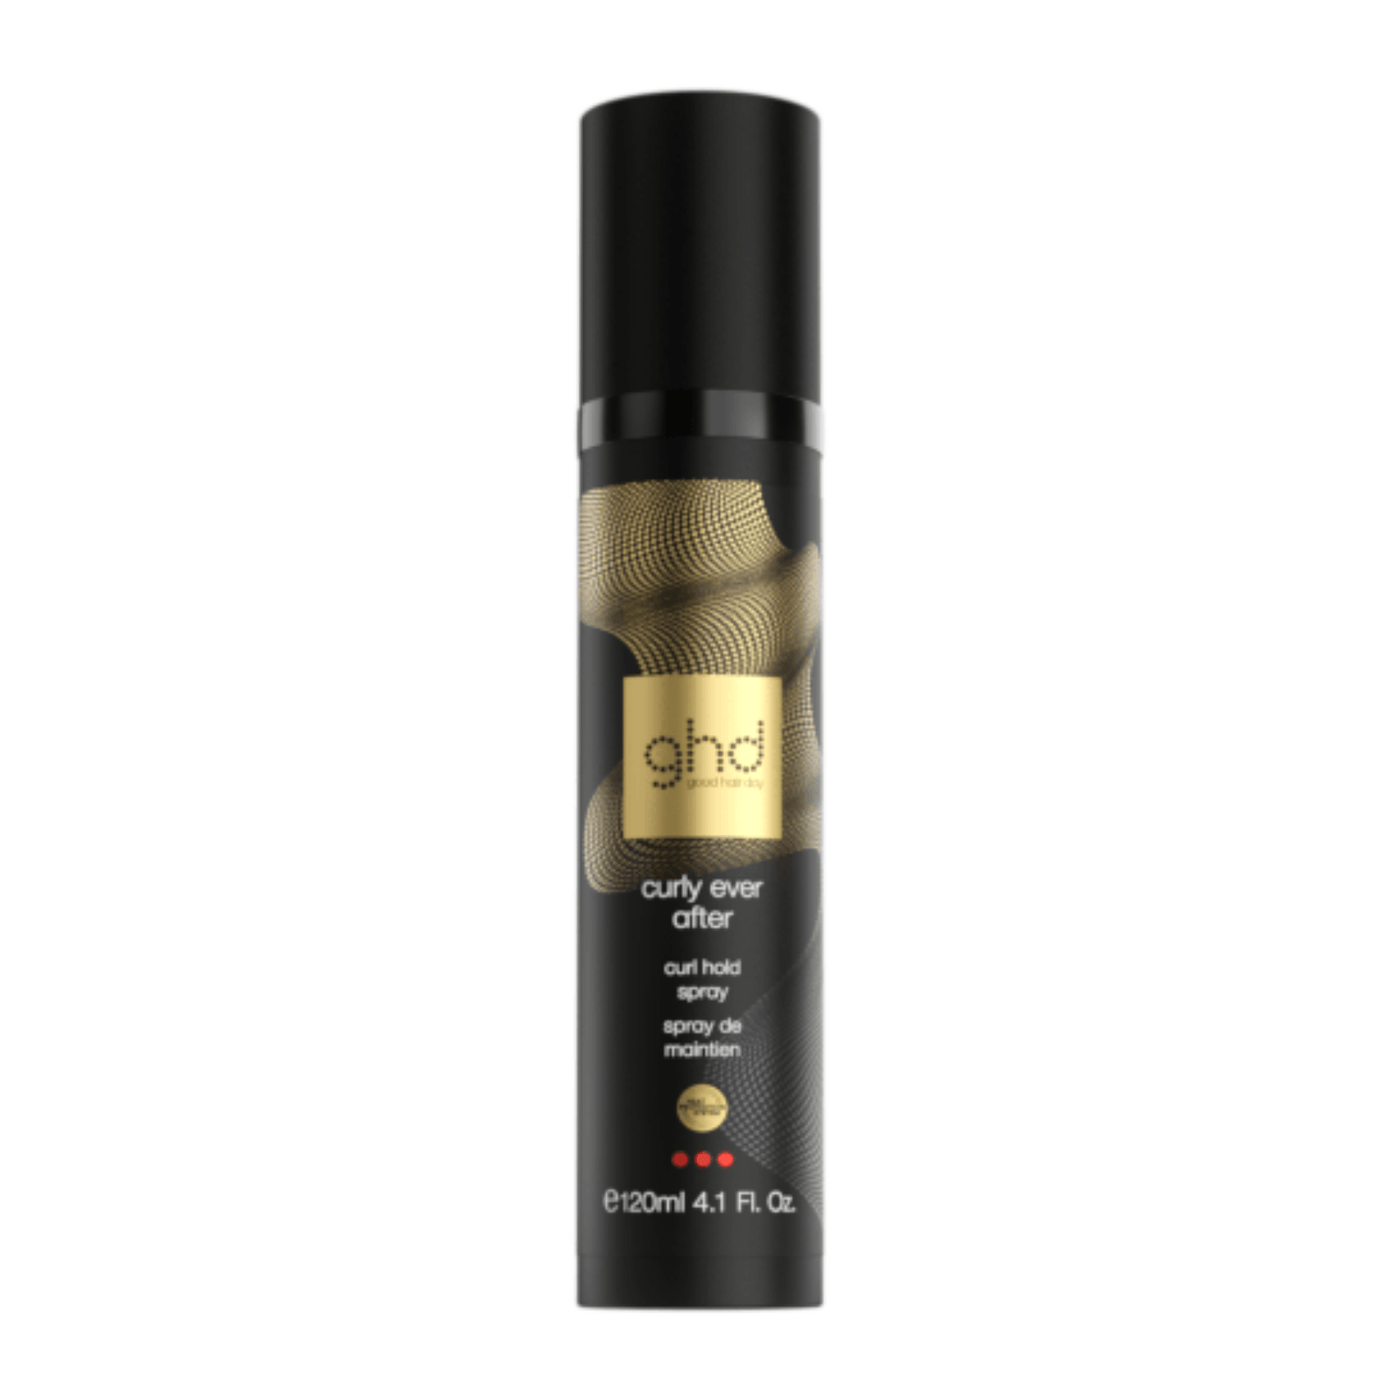 ghd Styling ghd curly ever after - curl hold spray 120ml